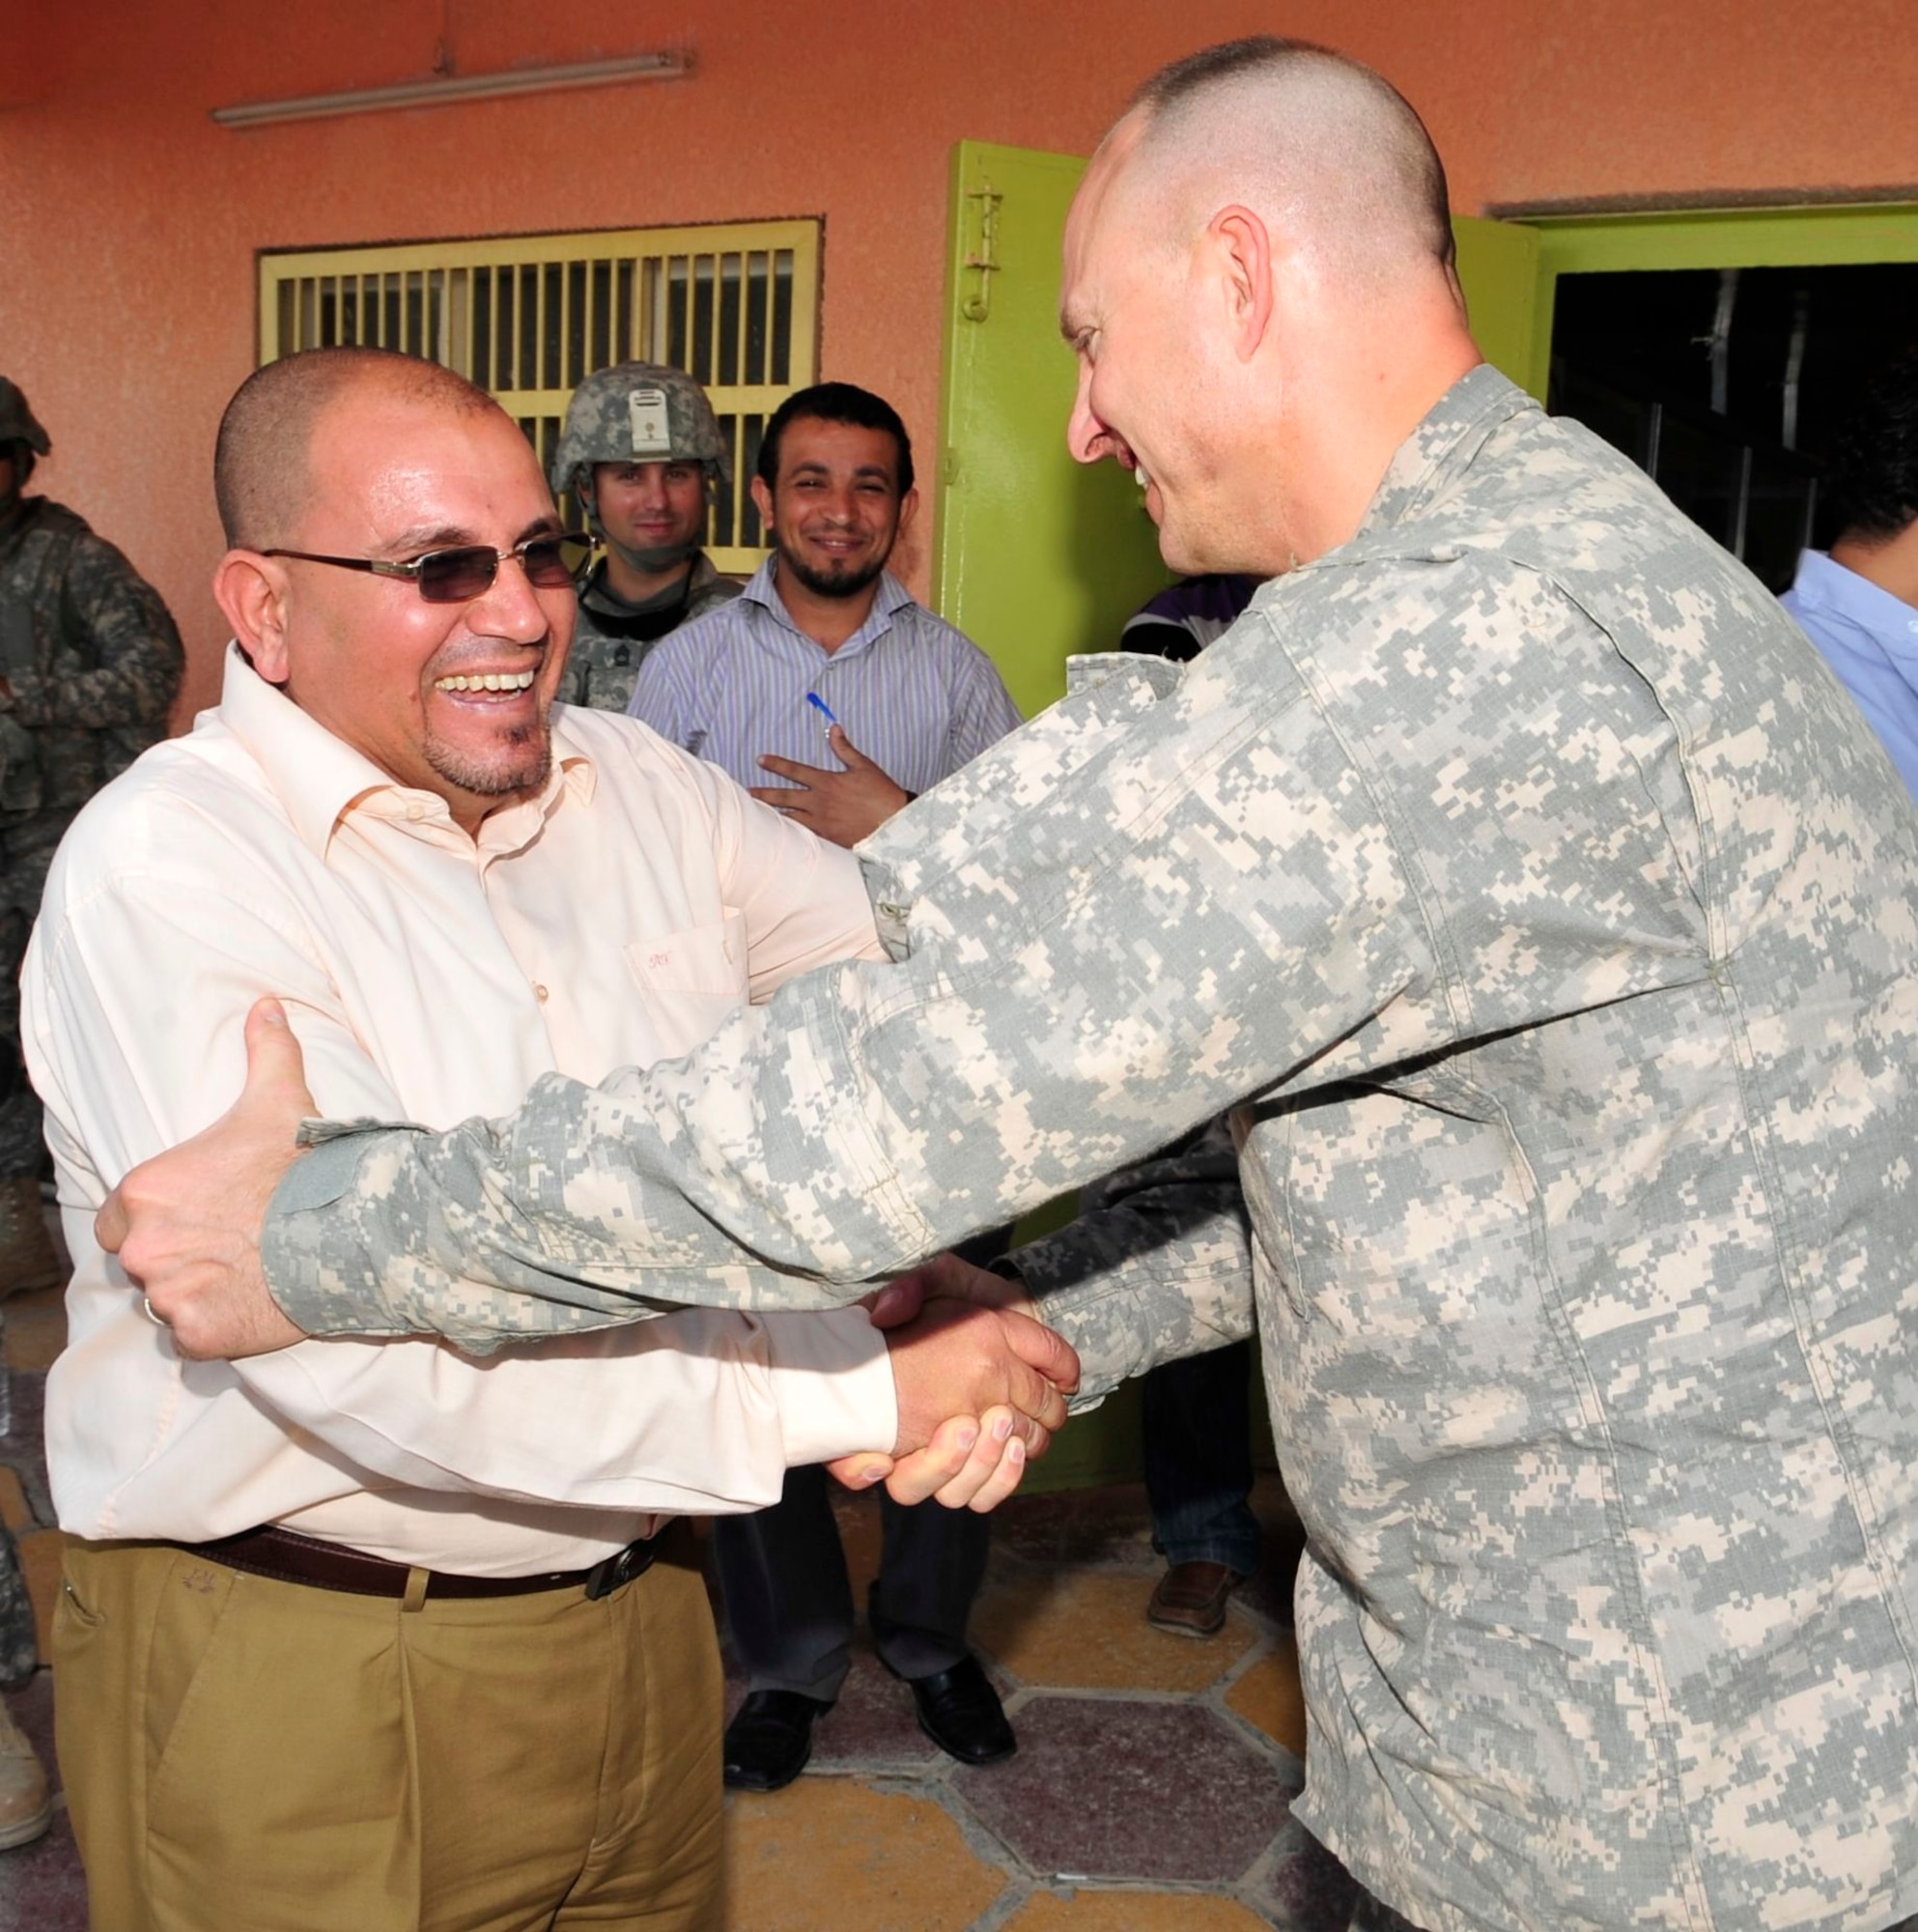 U.S. Army Capt. Mark Weber, U.S. Forces – Iraq corrections assistance transition team officer in charge, from Greenfield, Iowa, shakes hands with the prison warden at a facility in the Rusafa Prison Complex, Baghdad, Iraq, April 6, 2011. CATT members take notes as they ask questions and review conditions for inmates. (U.S. Air Force photo by Senior Master Sgt. Larry A. Schneck)